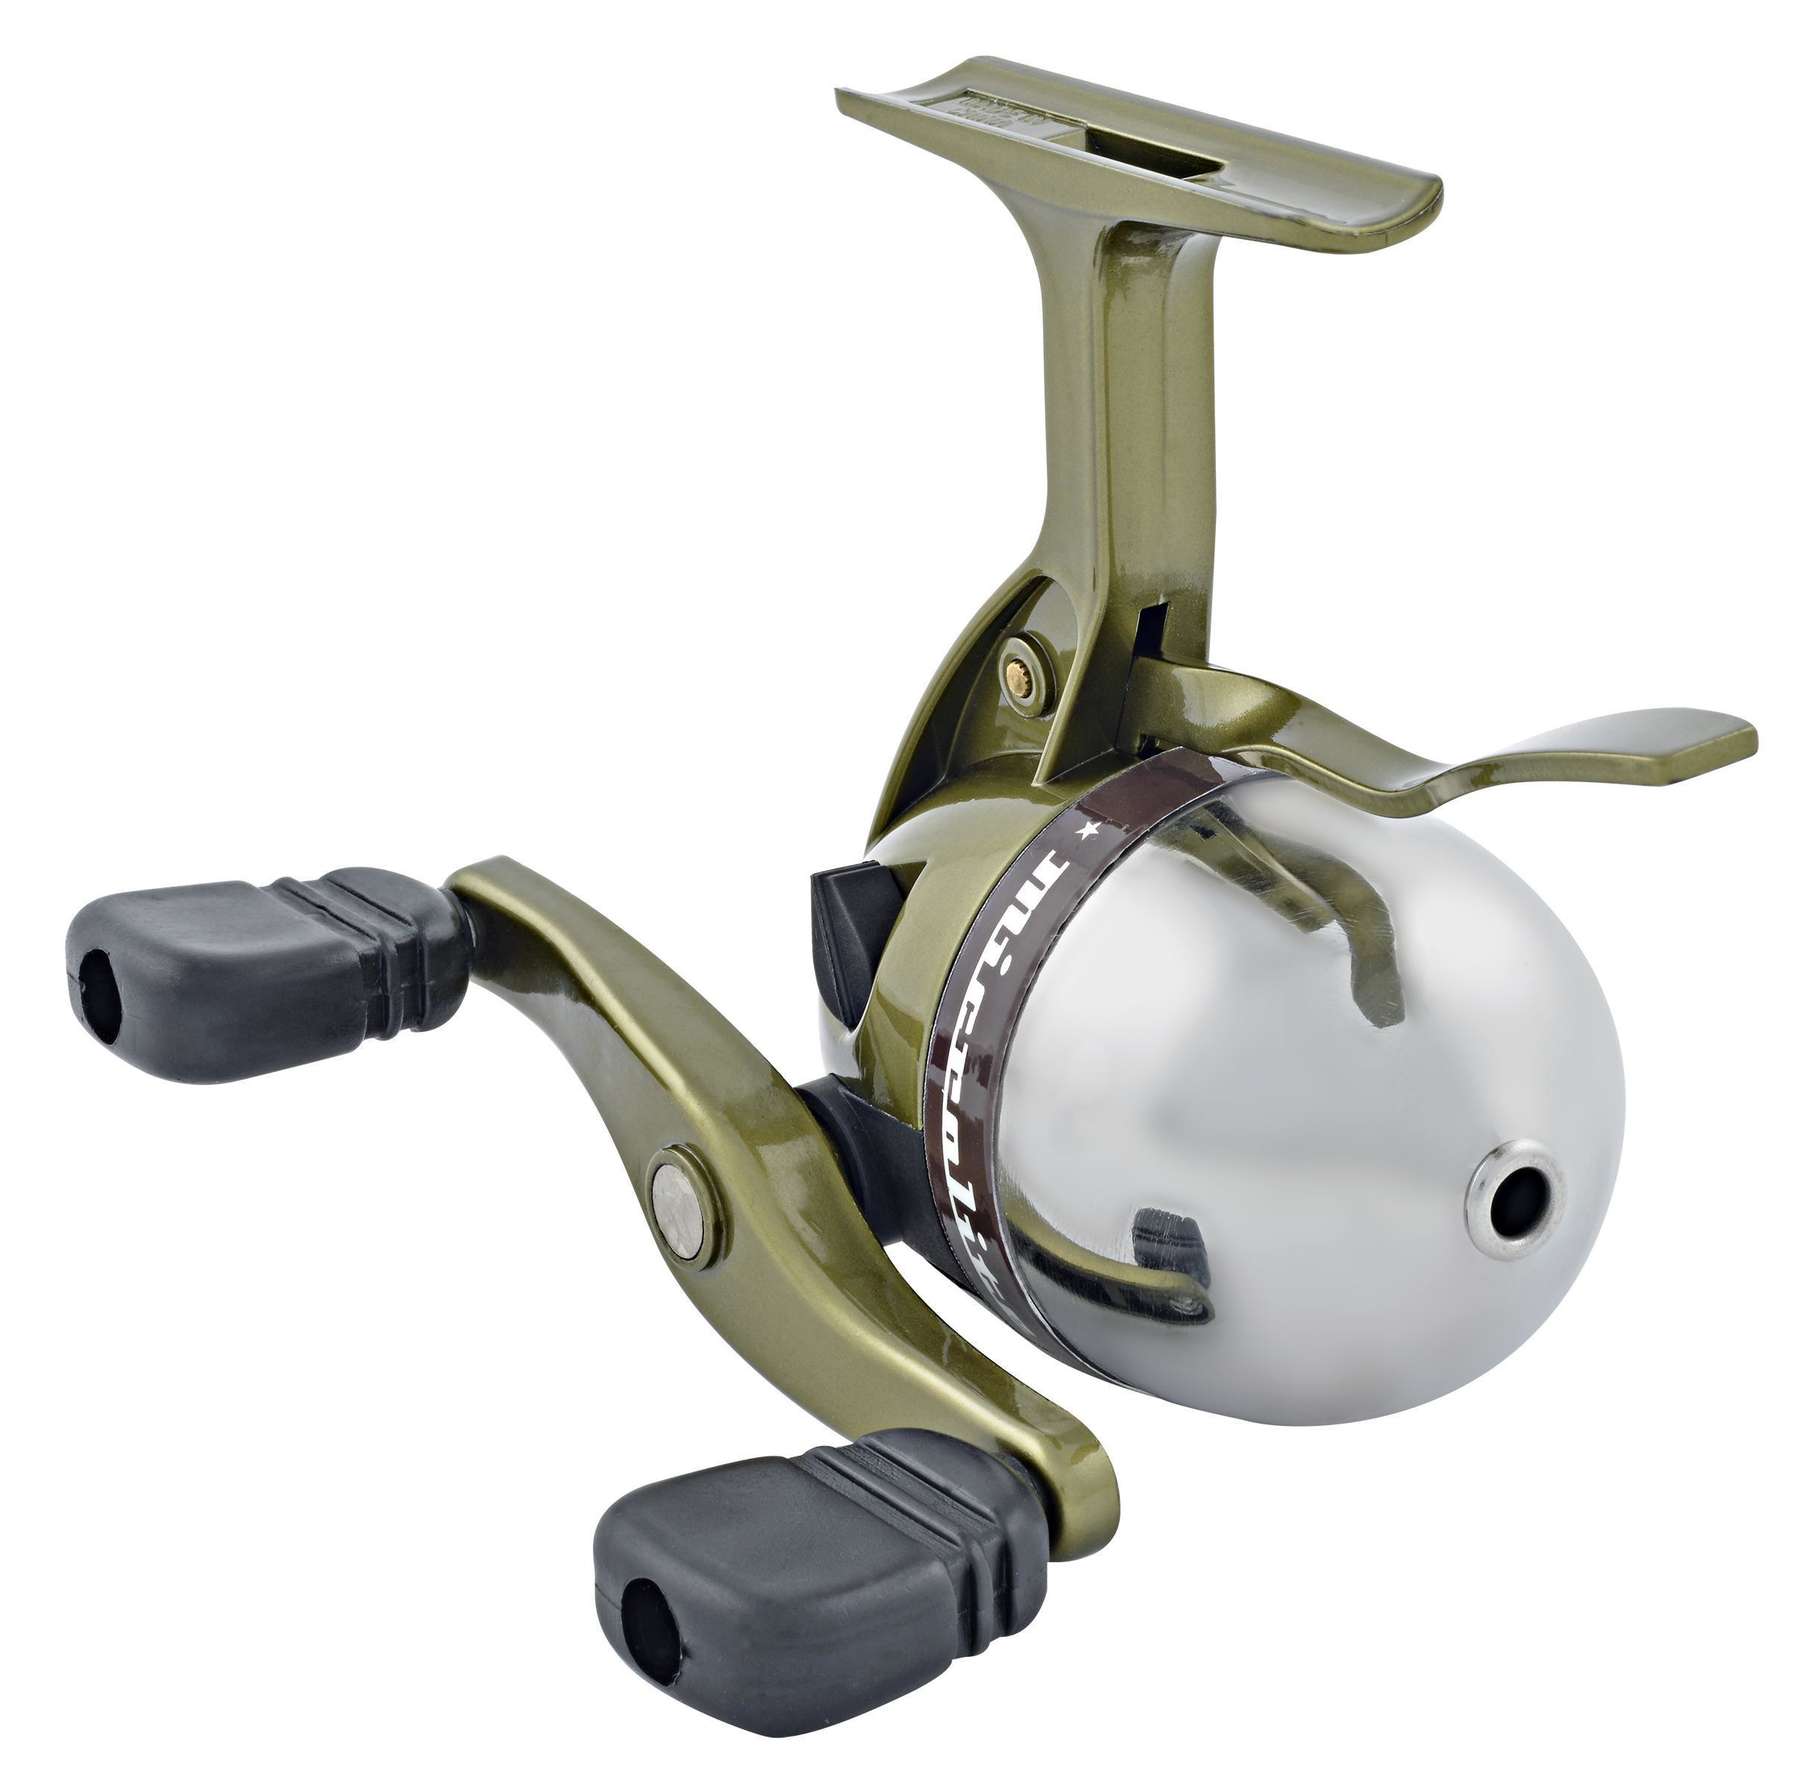 South Bend MCR LT Trigger Spin Reel Clam - Stainless Steel